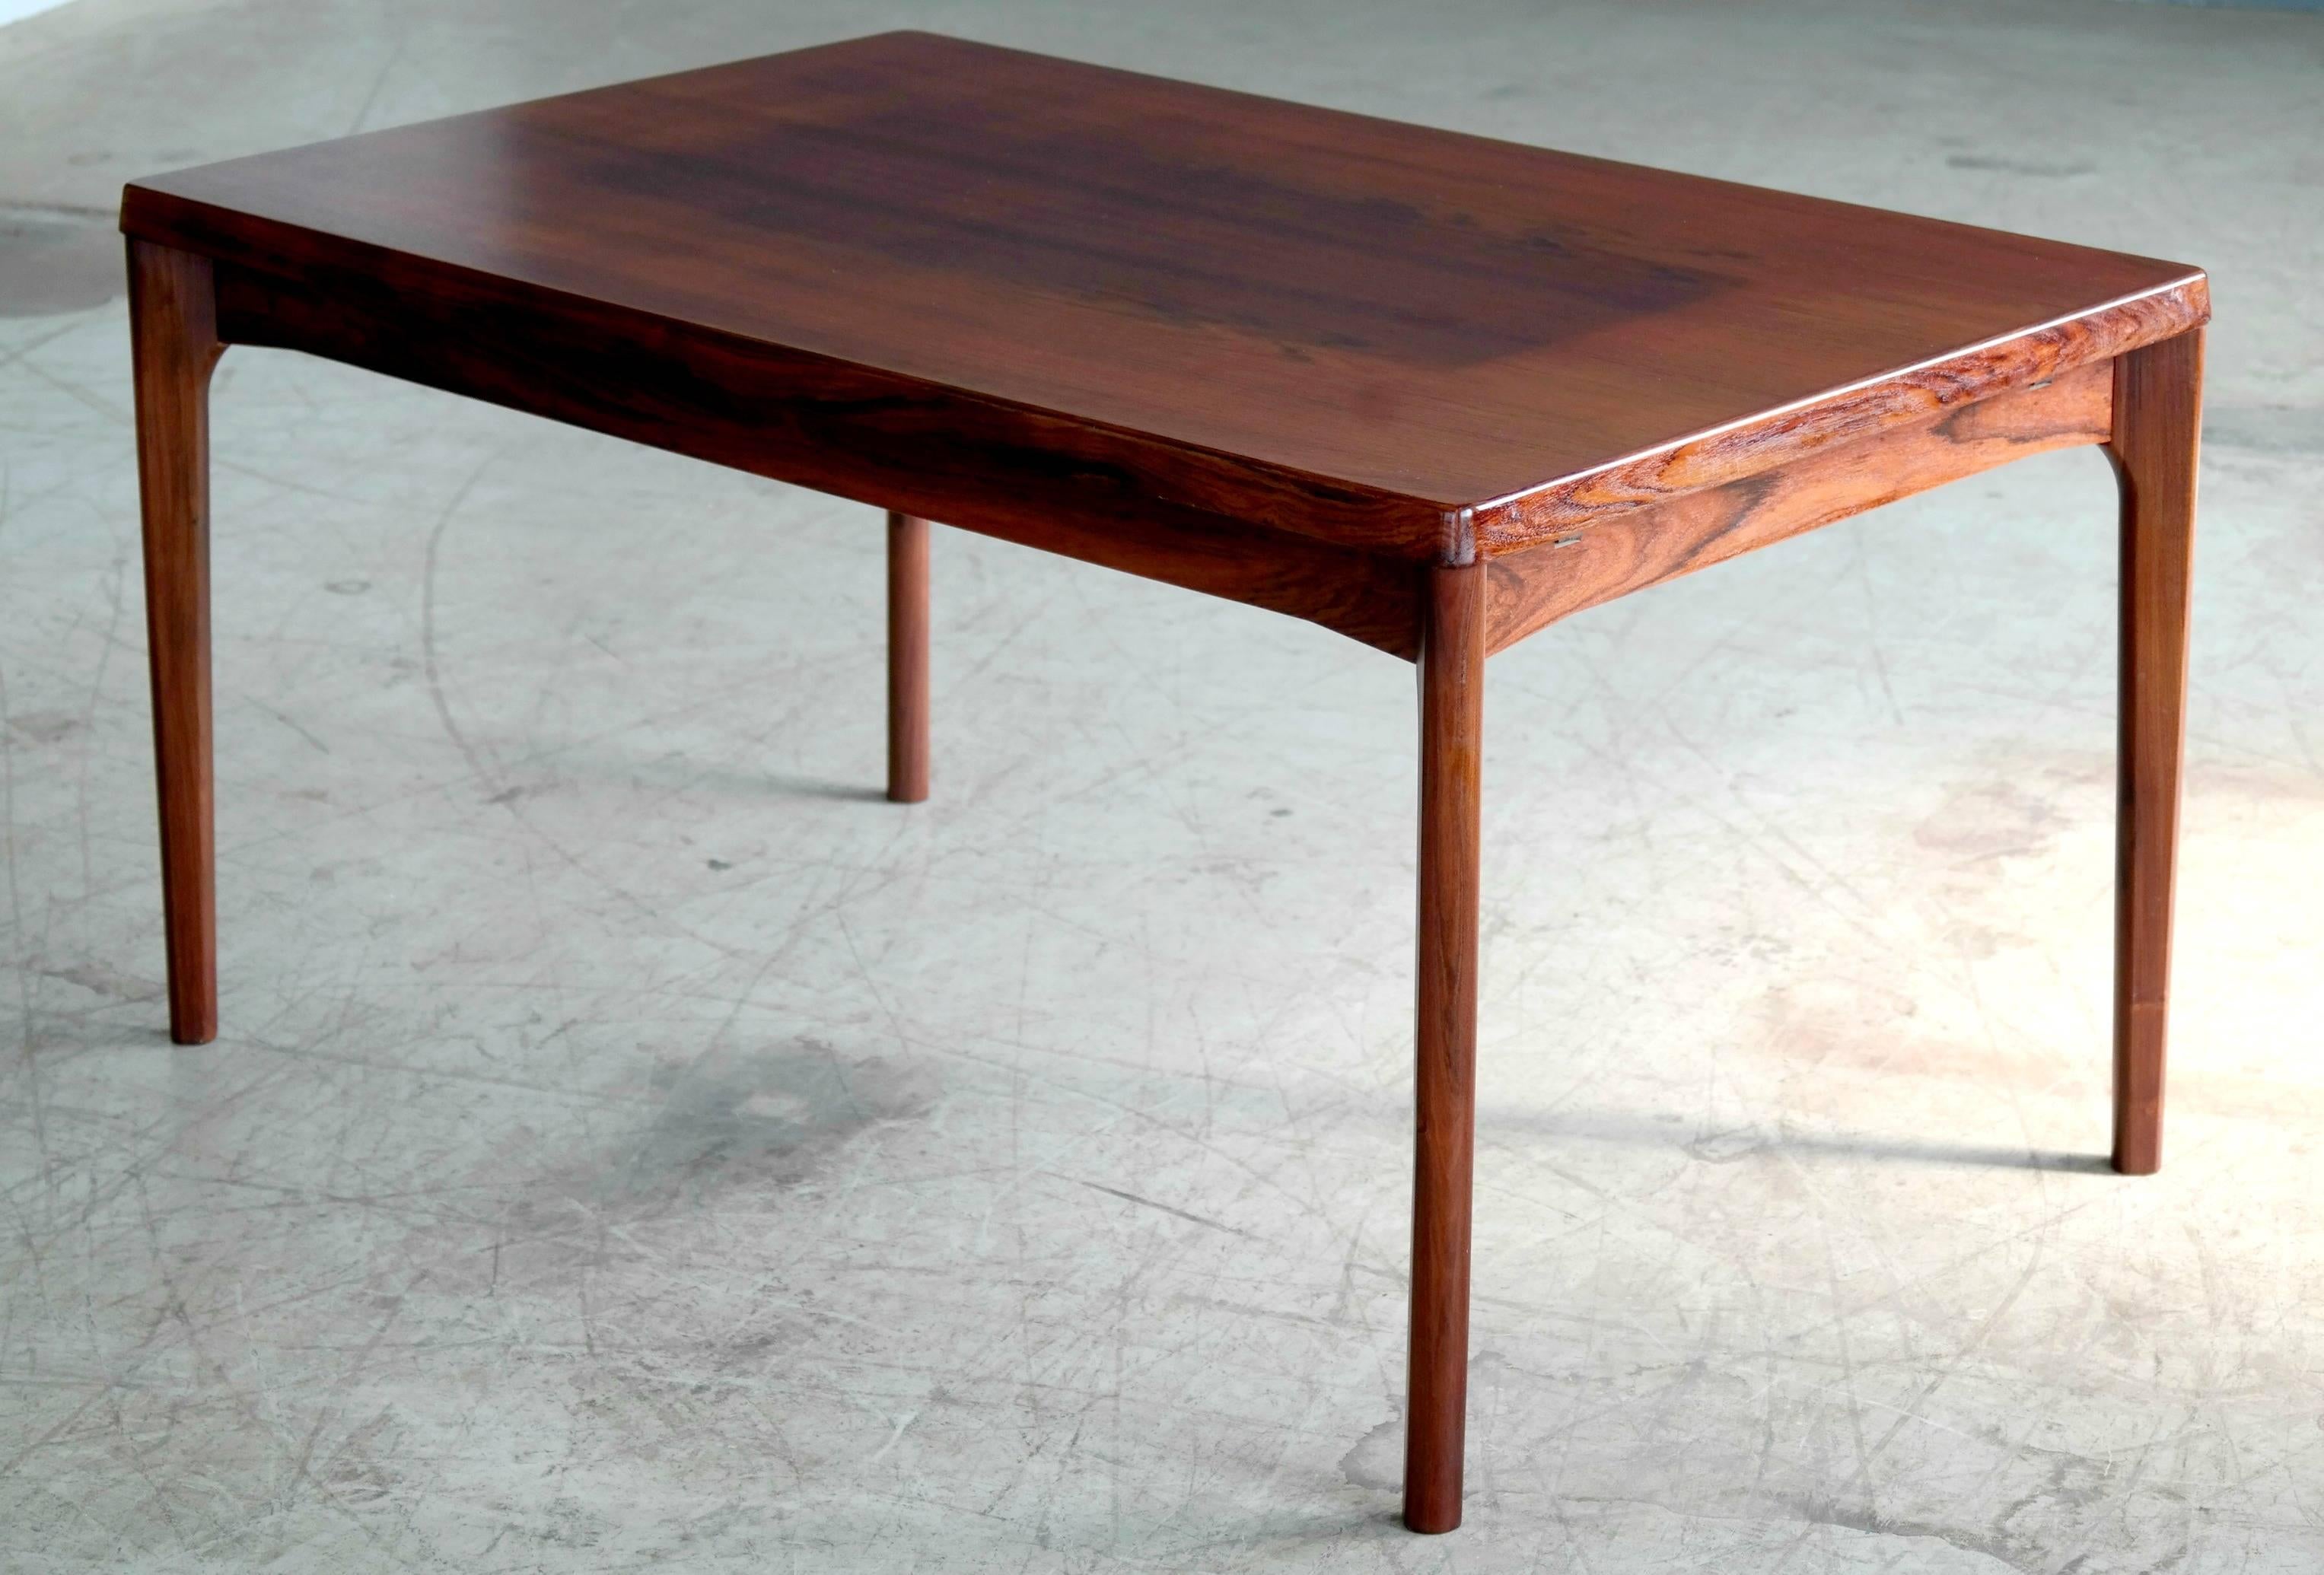 A stunning rosewood draw leaf dining table by Henning Kjaernulf for Vejle Stole & Møbelfabrik in the 1960s. Features beautiful rosewood grain with solid thick edges and sculpted legs. Expandable with two draw leafs to comfortably seat of ten